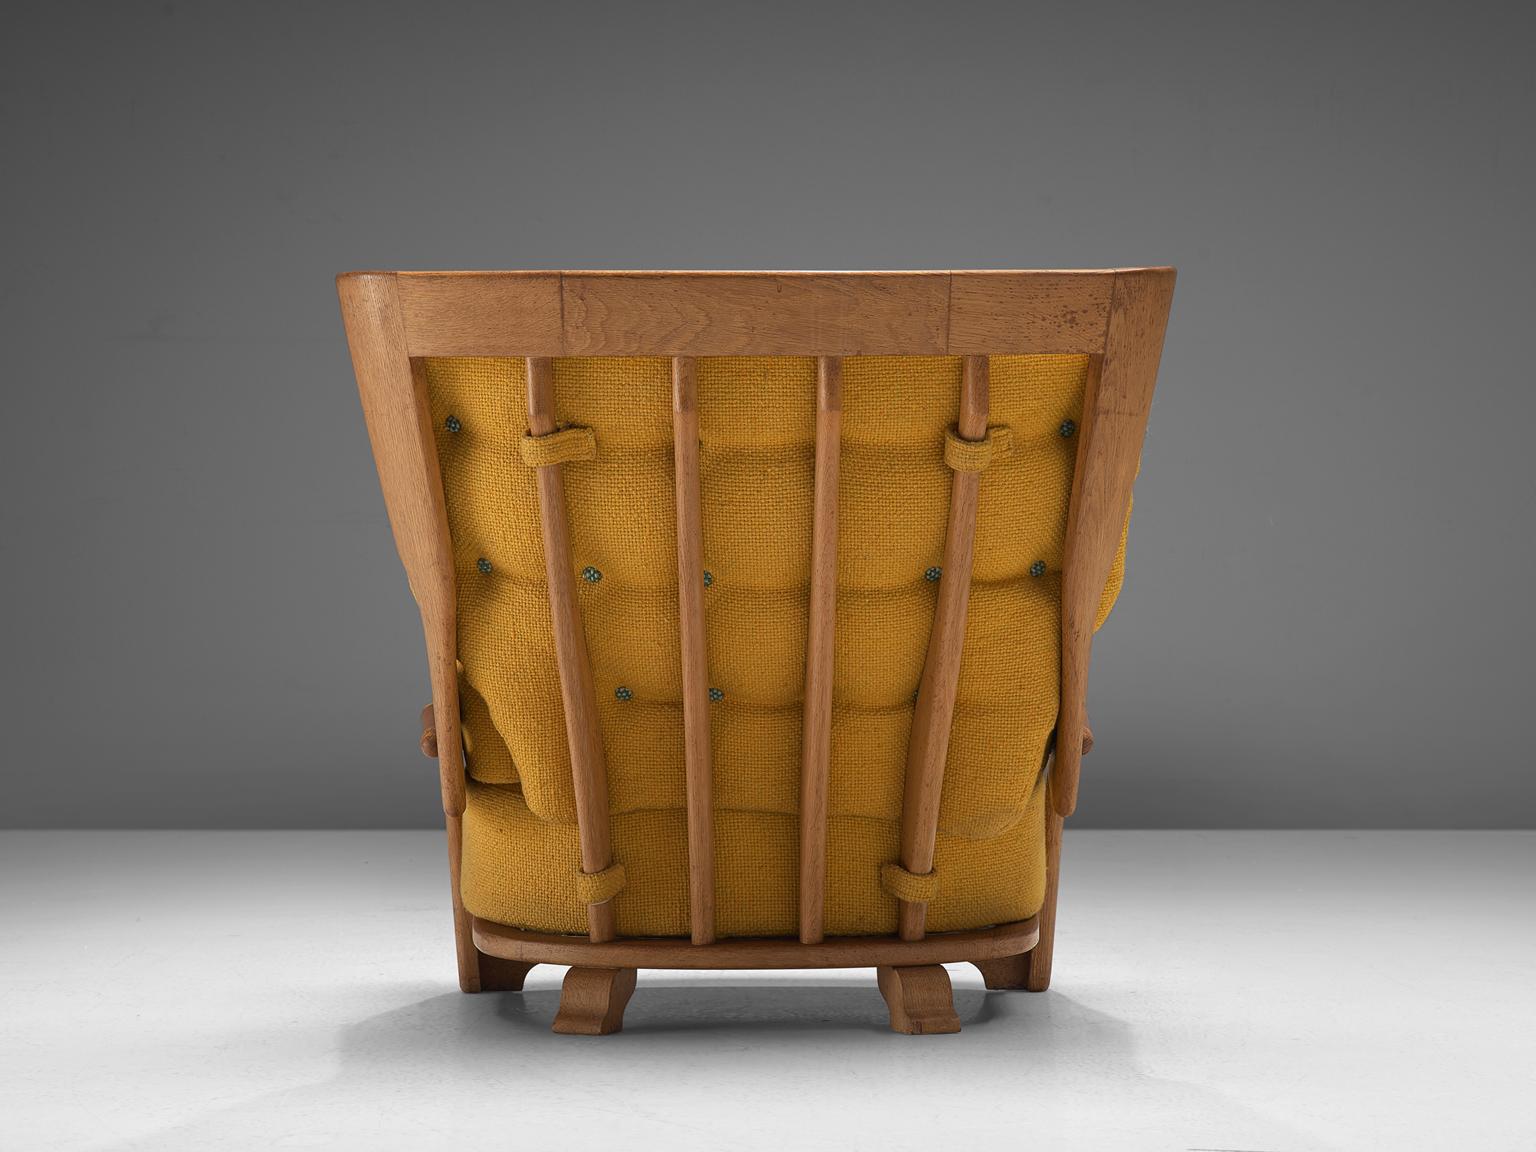 Guillerme & Chambron for Votre Maison, lounge chair, fabric and oak, France, 1960s.

An extraordinary Guillerme and Chambron lounge chair in solid oak with the typical characteristic decorative details at the back and capricious forms of the legs.